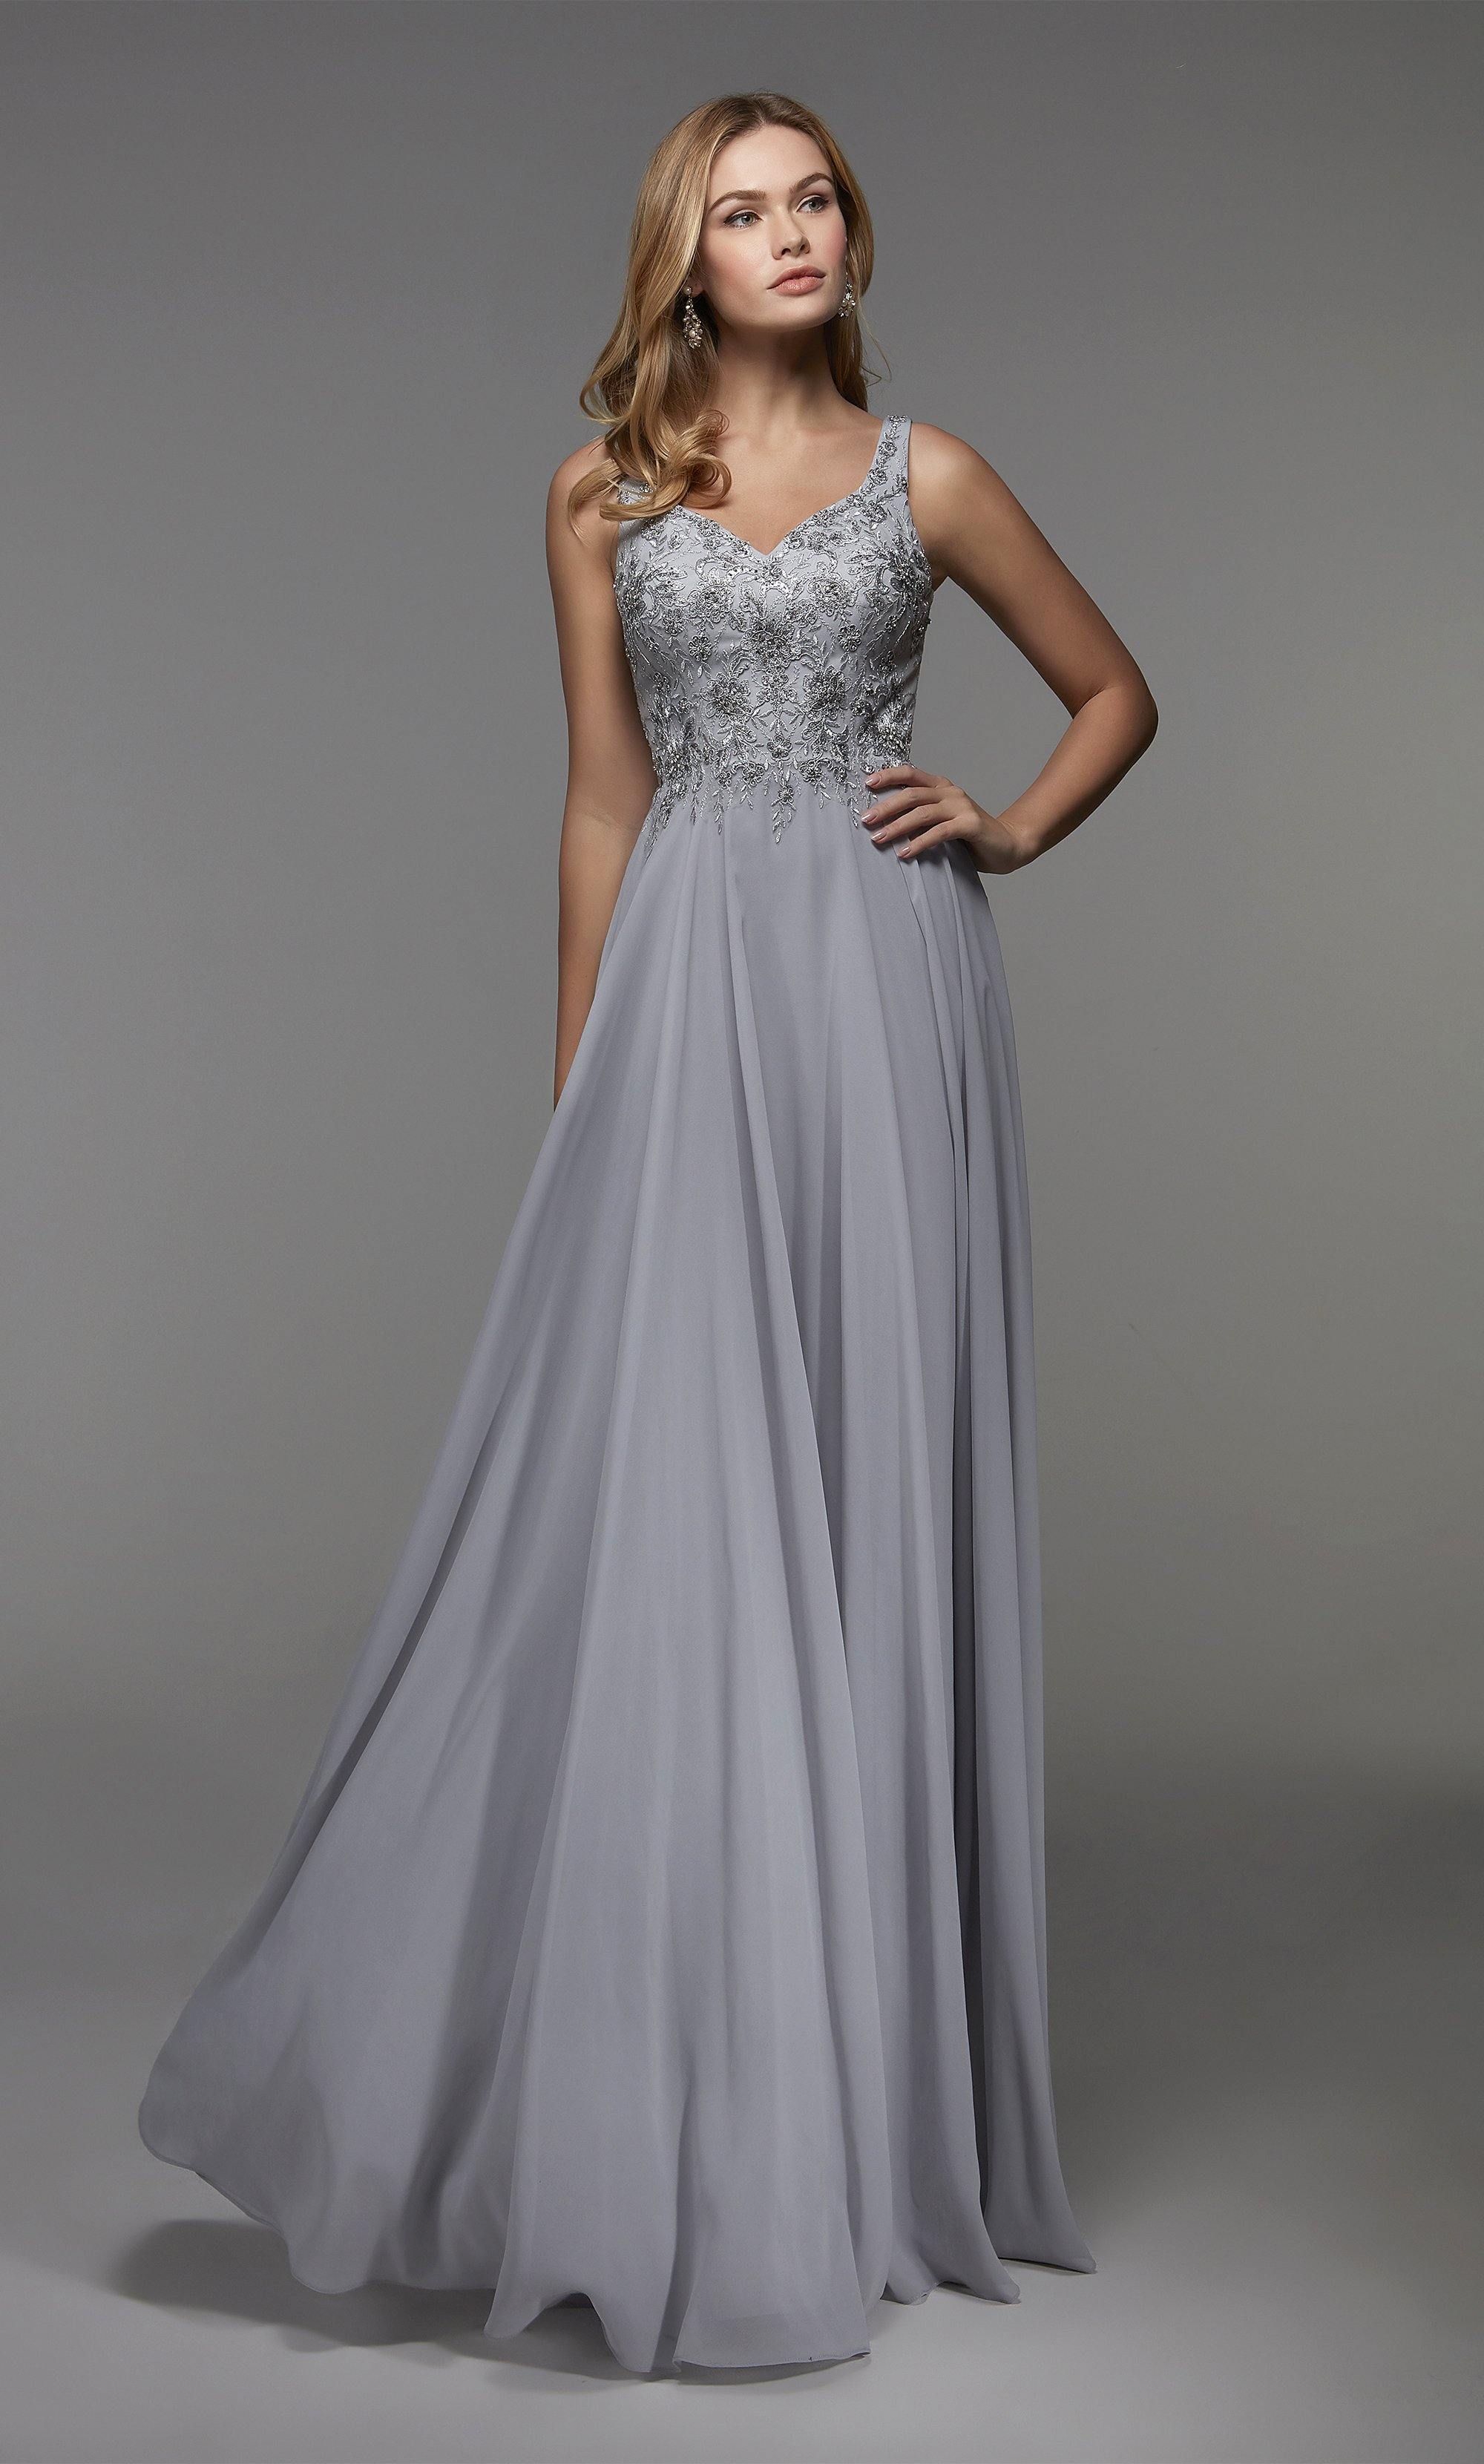 Elegant Long Ball Gown Dress With Sleeves